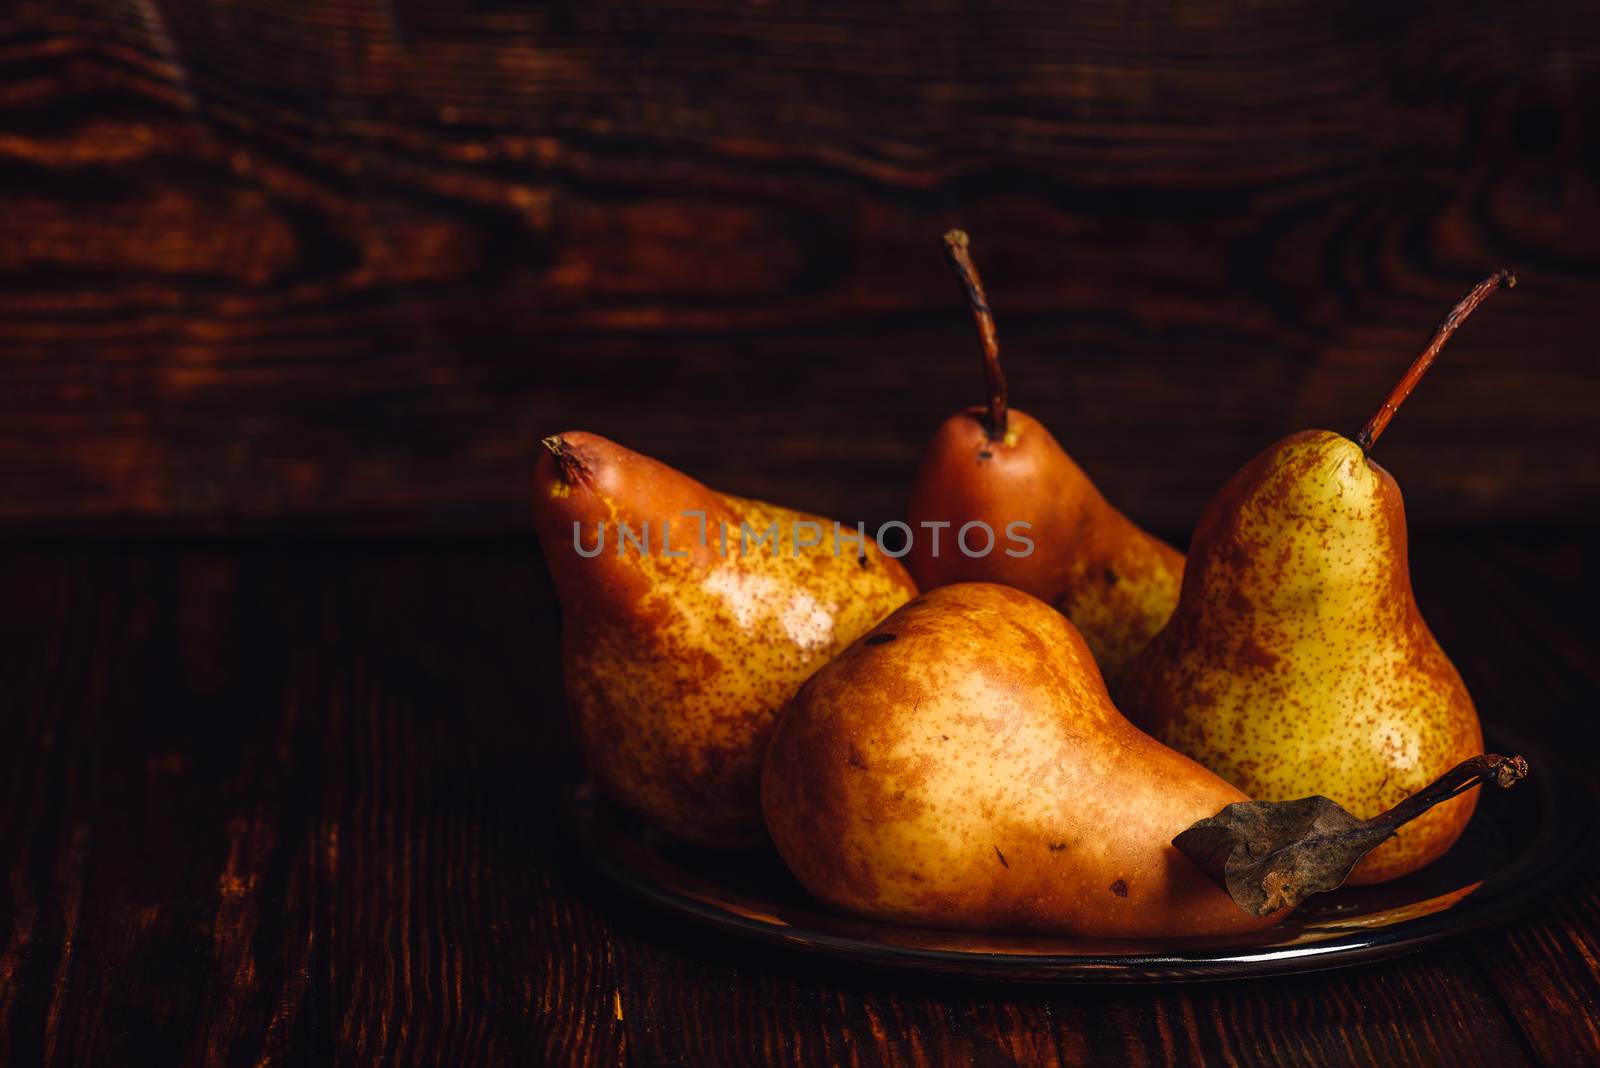 Few golden pears on metal plate over wooden background.